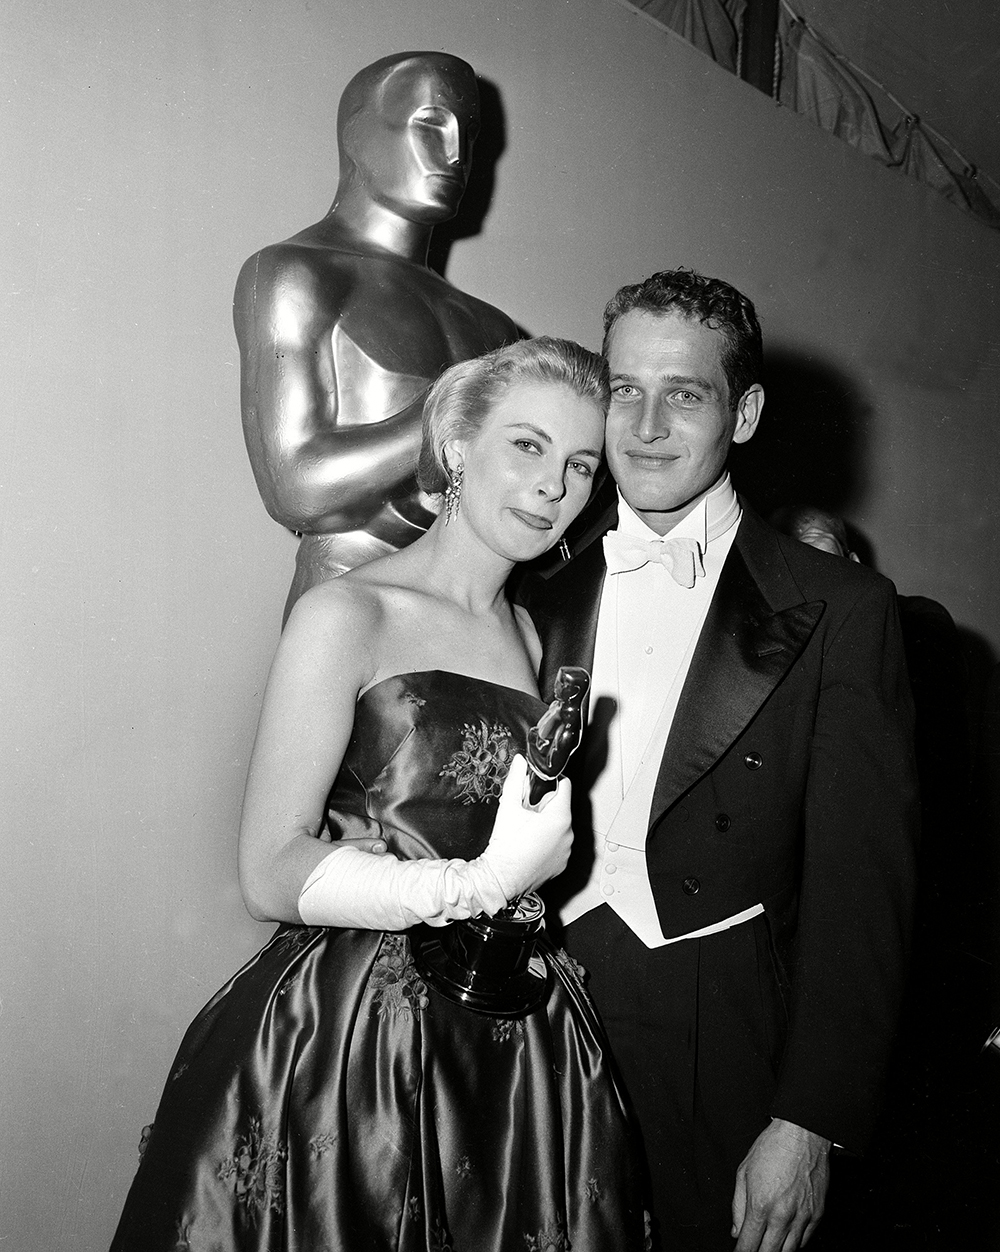 Paul Newman Joanne Woodward Then Now Photos Of Their Romance Hollywood Life